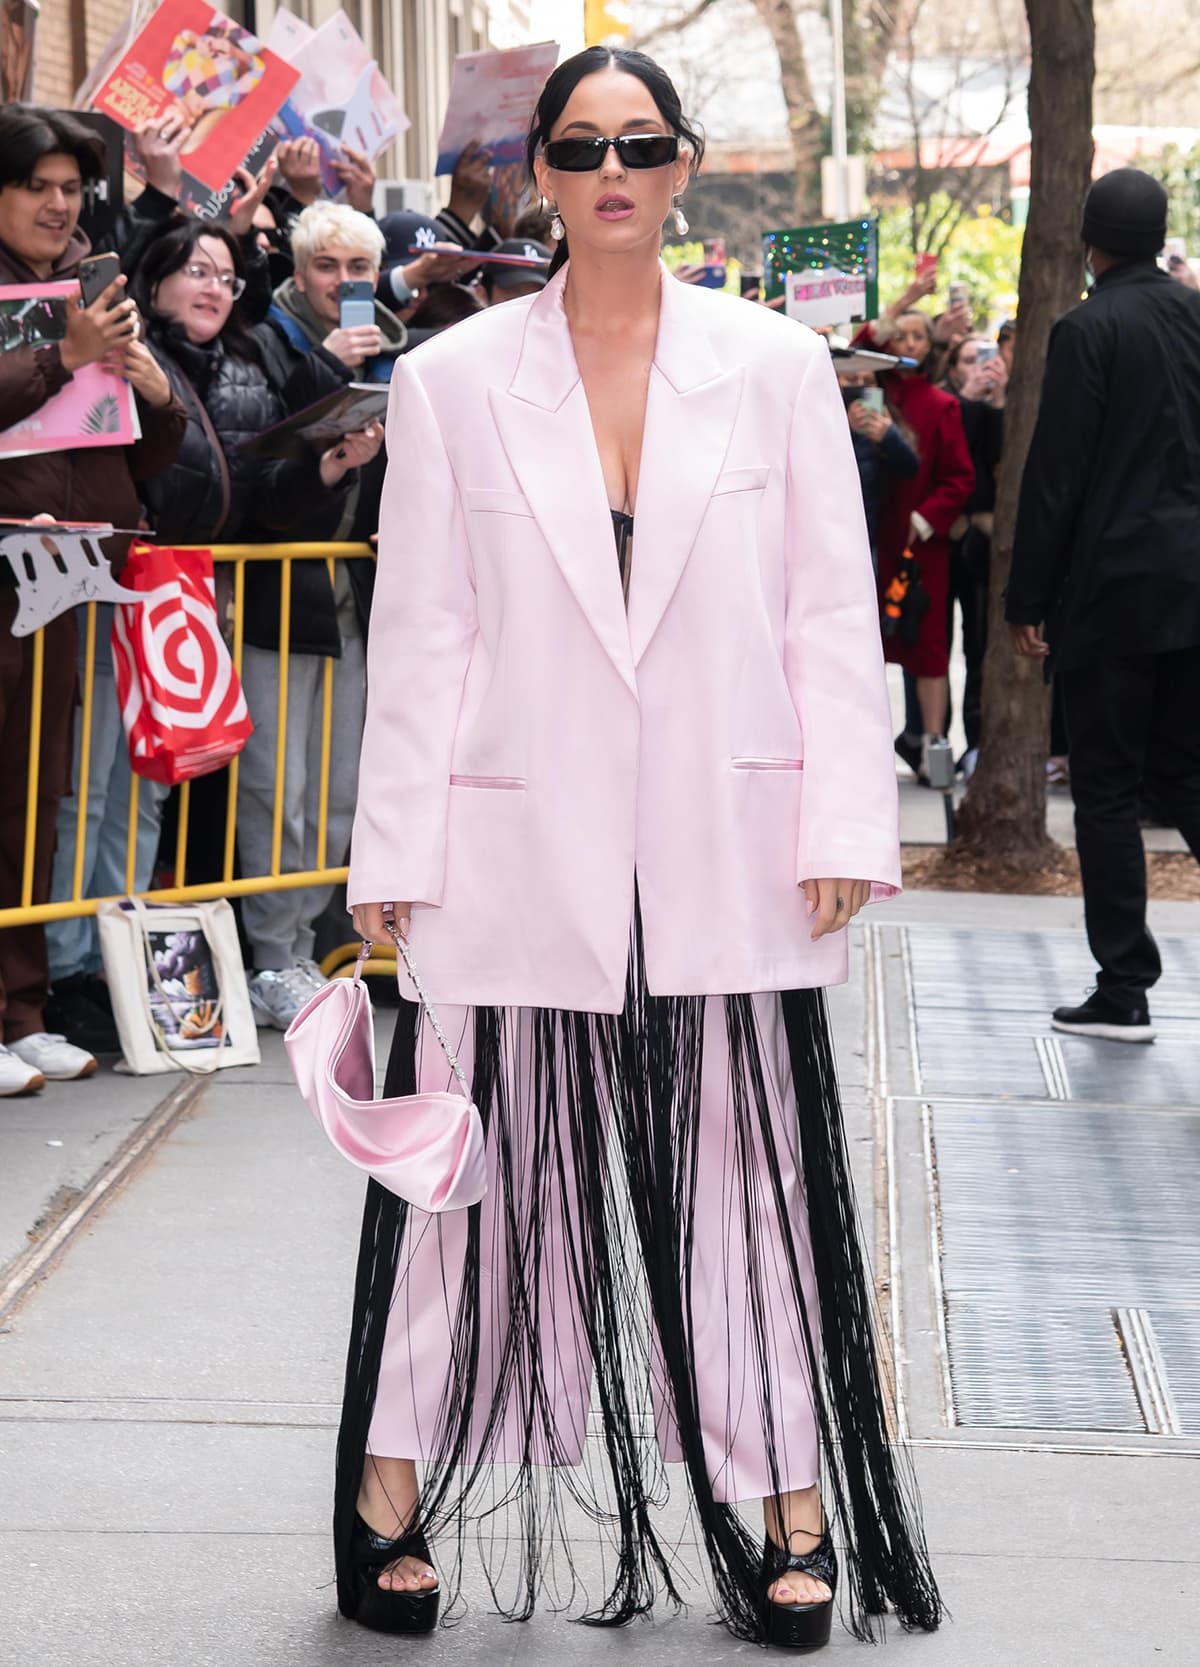 Katy Perry layers a black fringe dress underneath a boxy pink two-piece suit by Alexander Wang